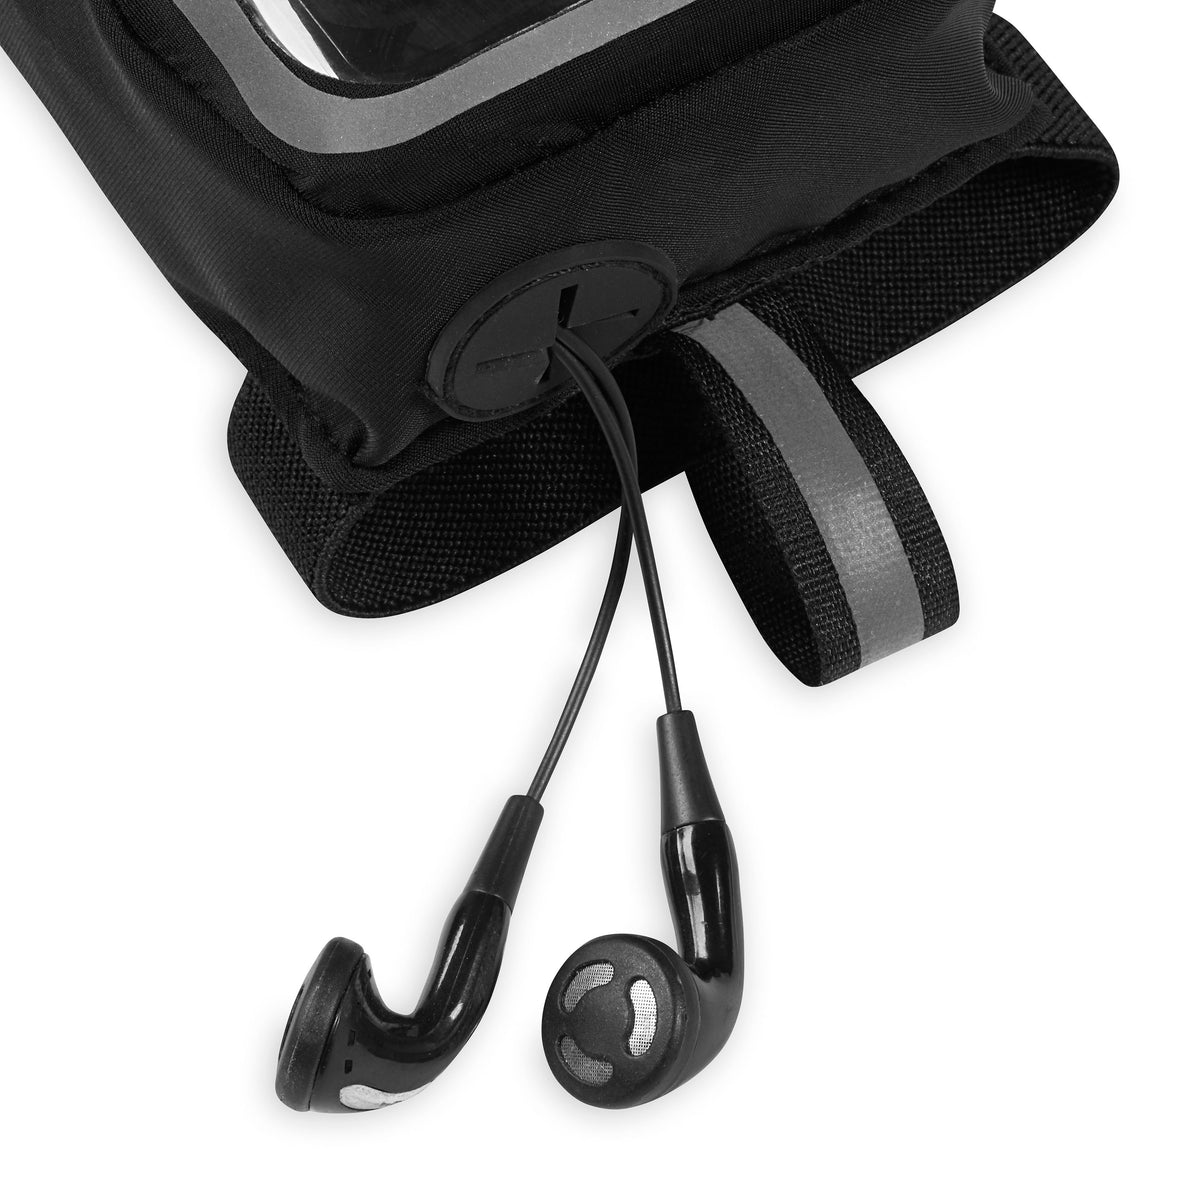 New Balance Smartphone Hydration Pack with headphones